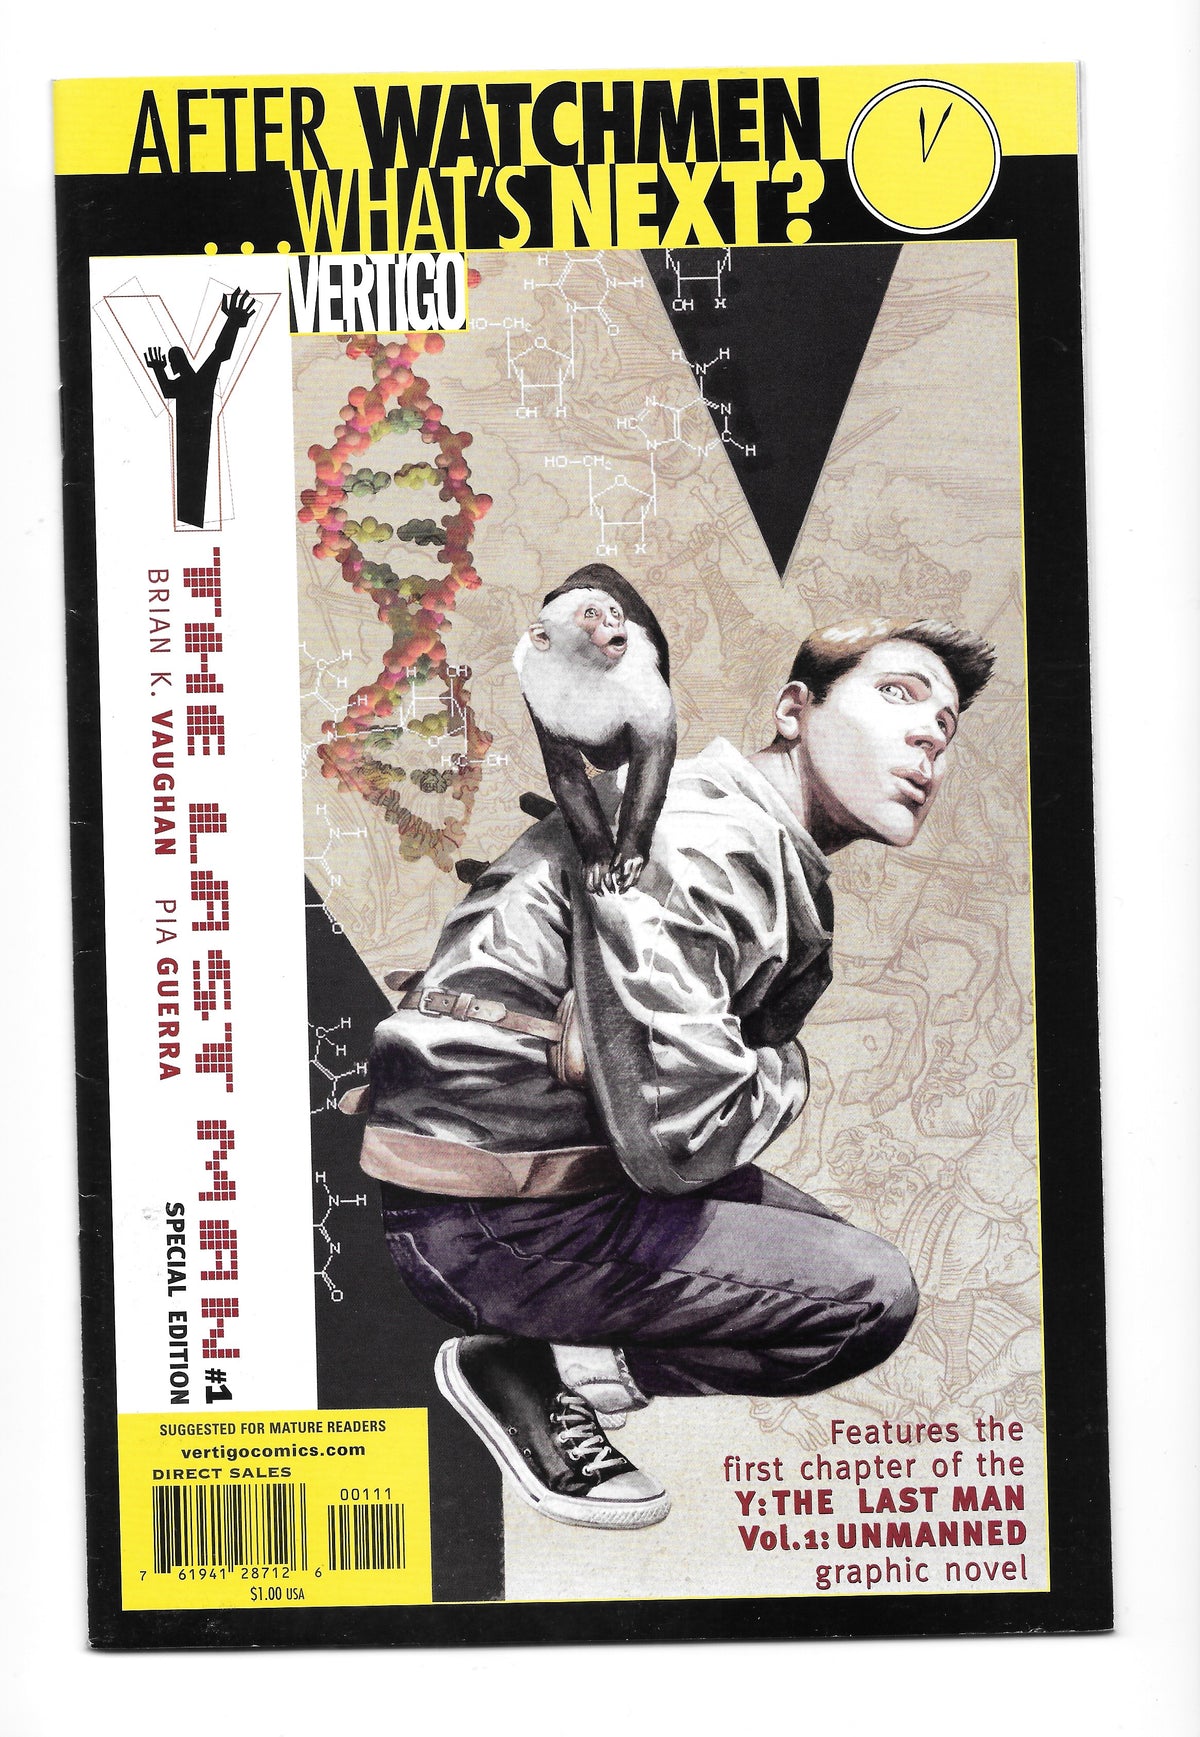 Photo of Y the Last Man Issue 1 Special Edition comic Sold by Stronghold Collectibles